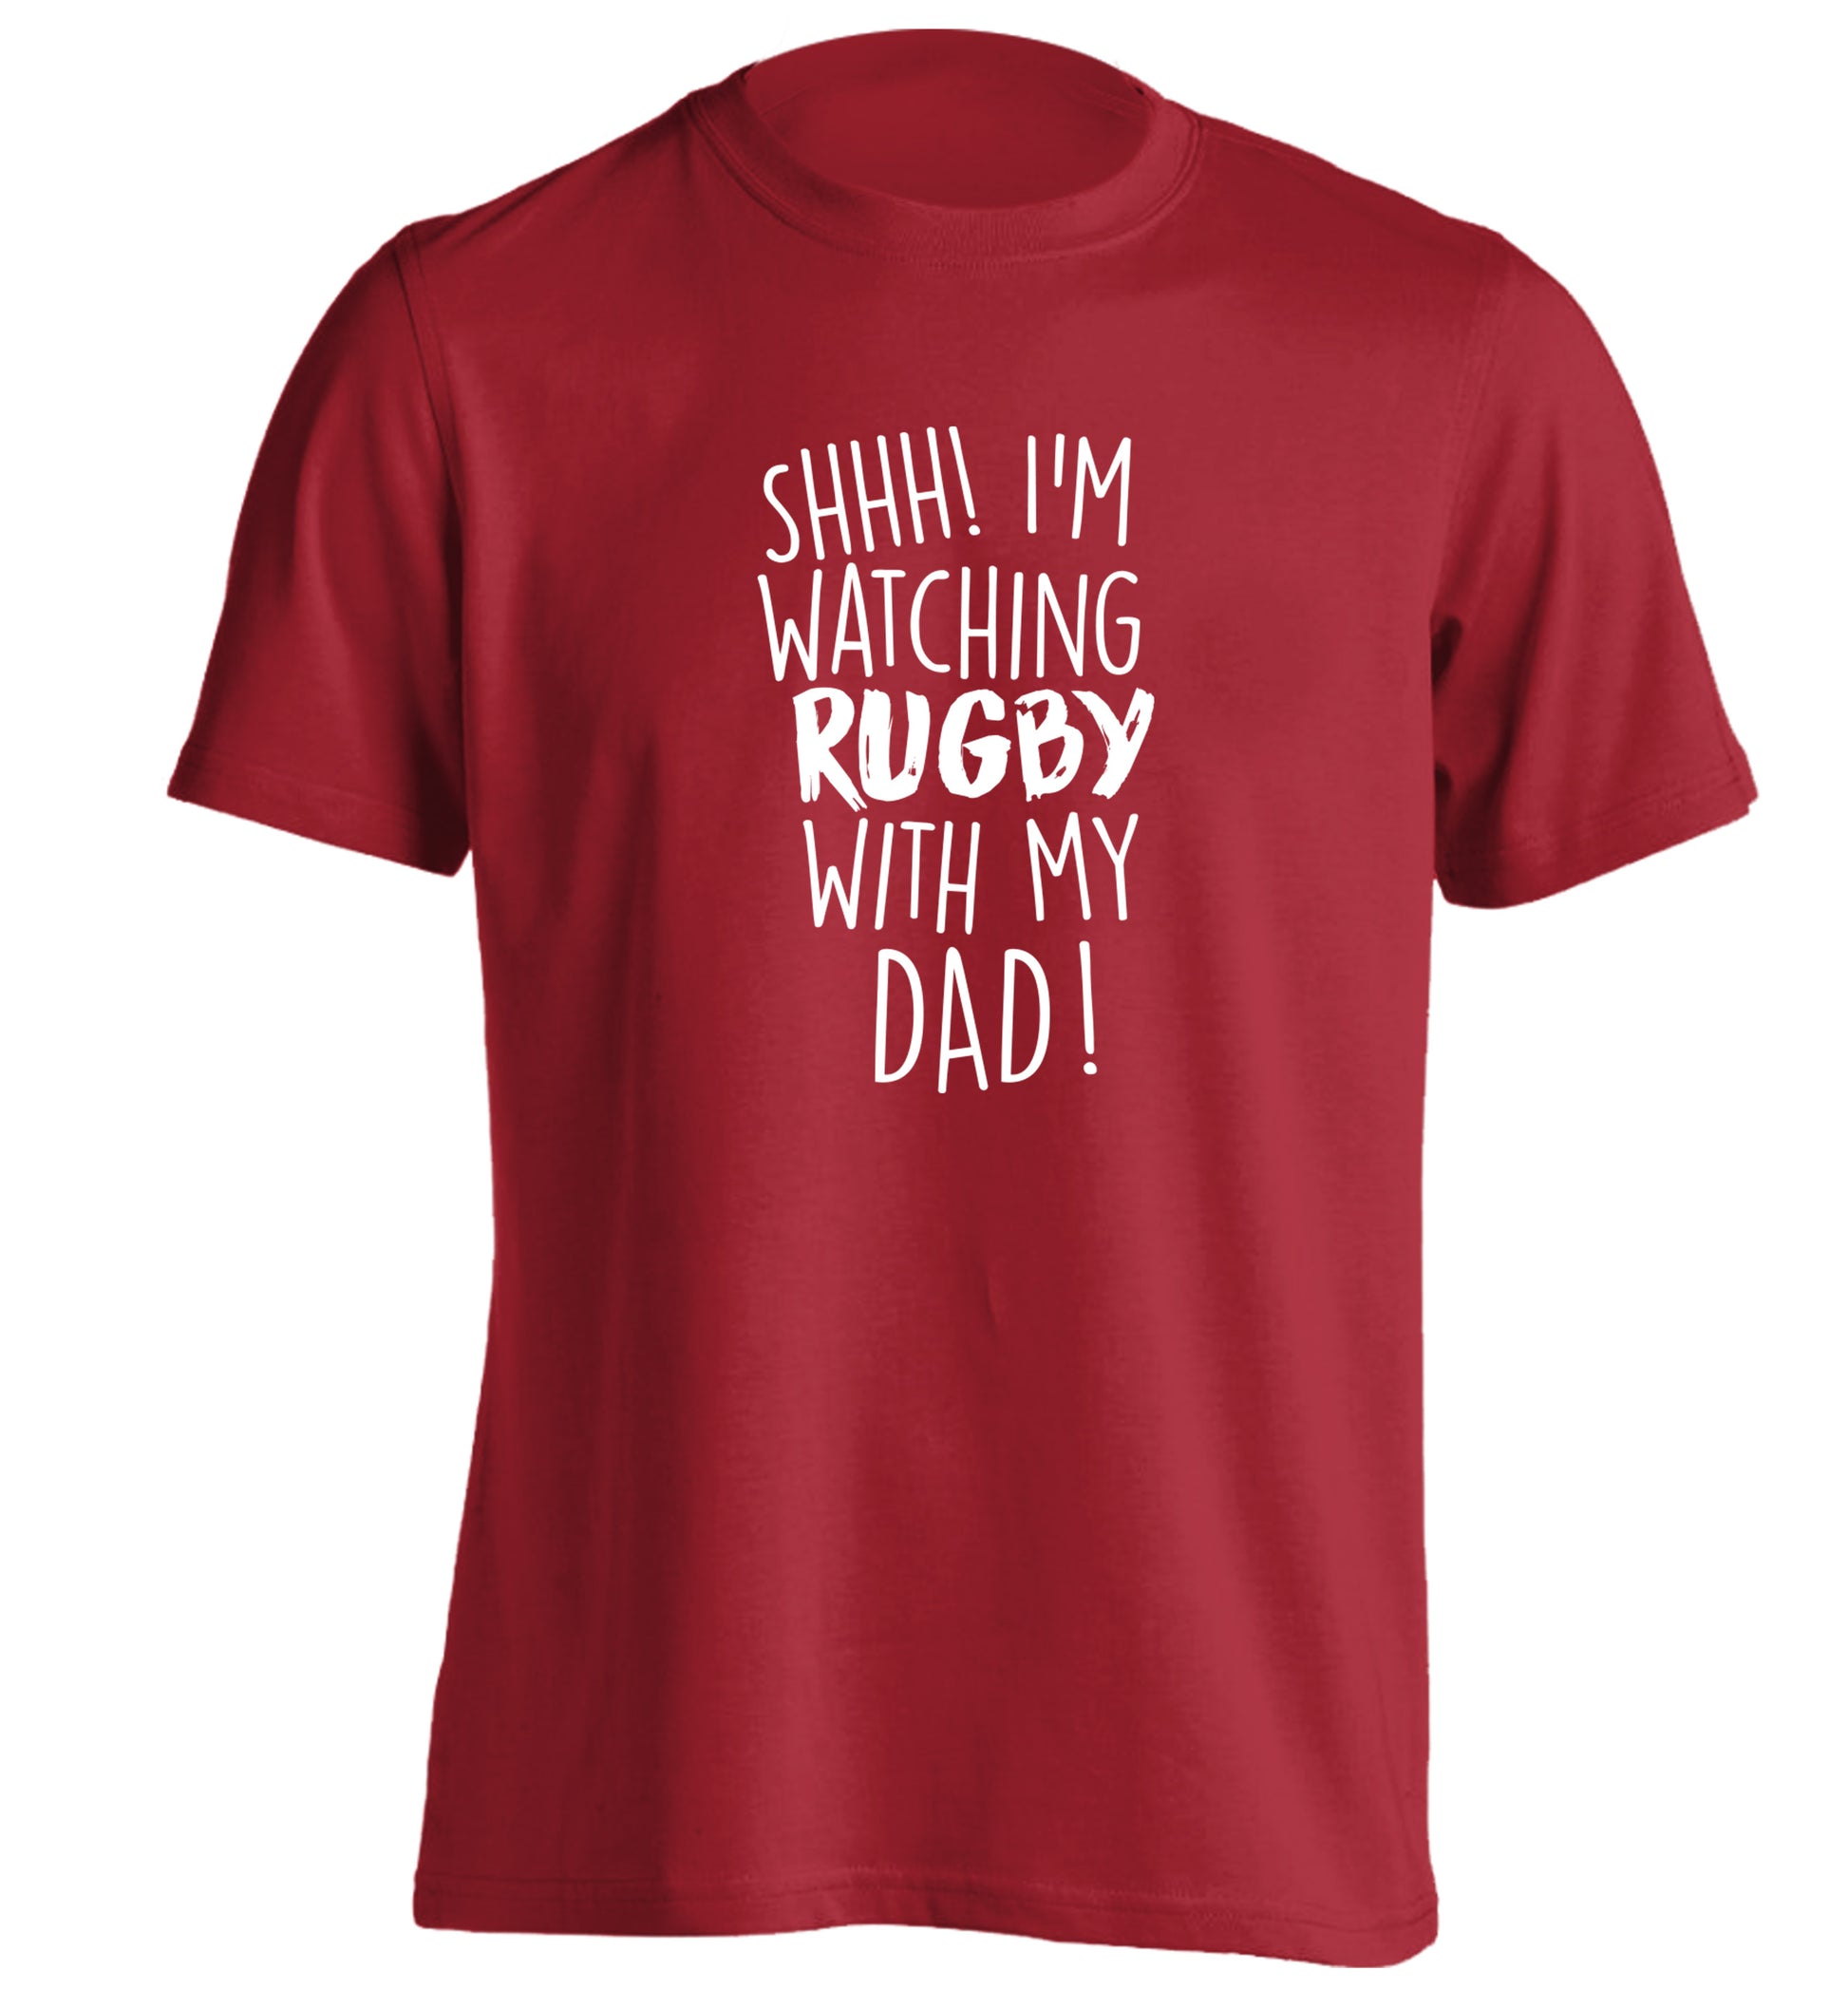 Shh... I'm watching rugby with my dad adults unisex red Tshirt 2XL